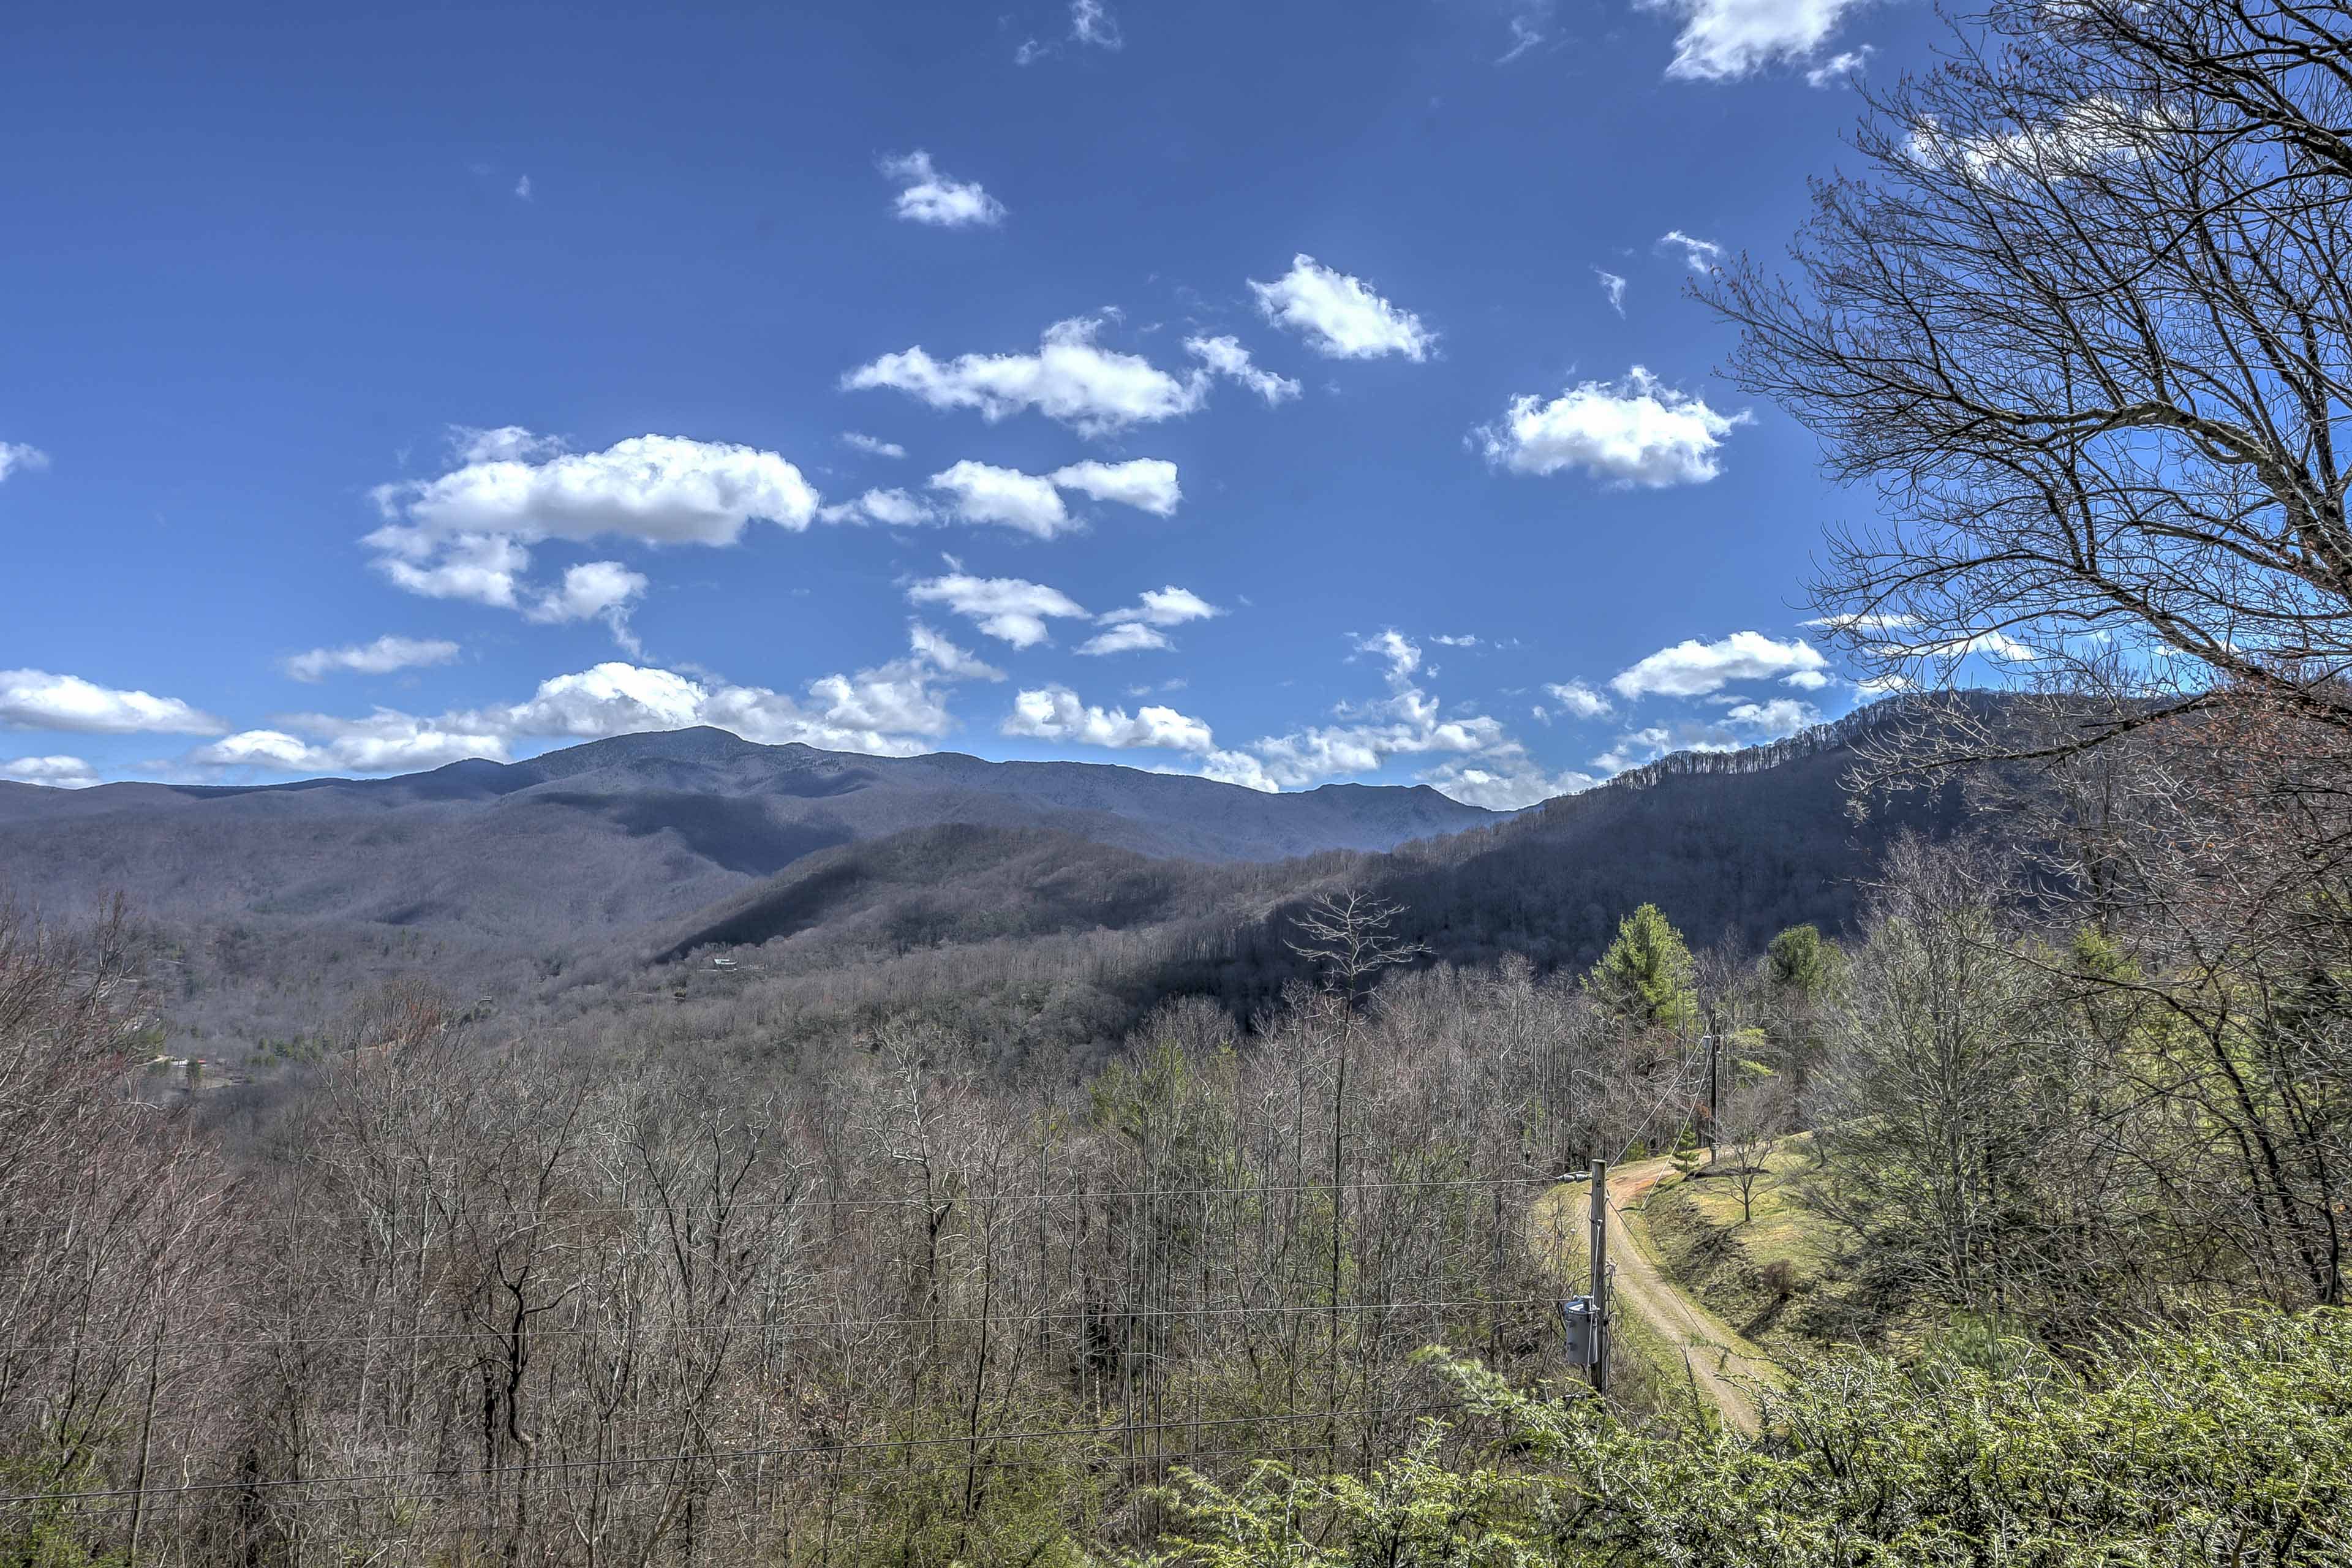 Aerial view of tree-covered mountains and a winding dirt road in Burnsville, NC